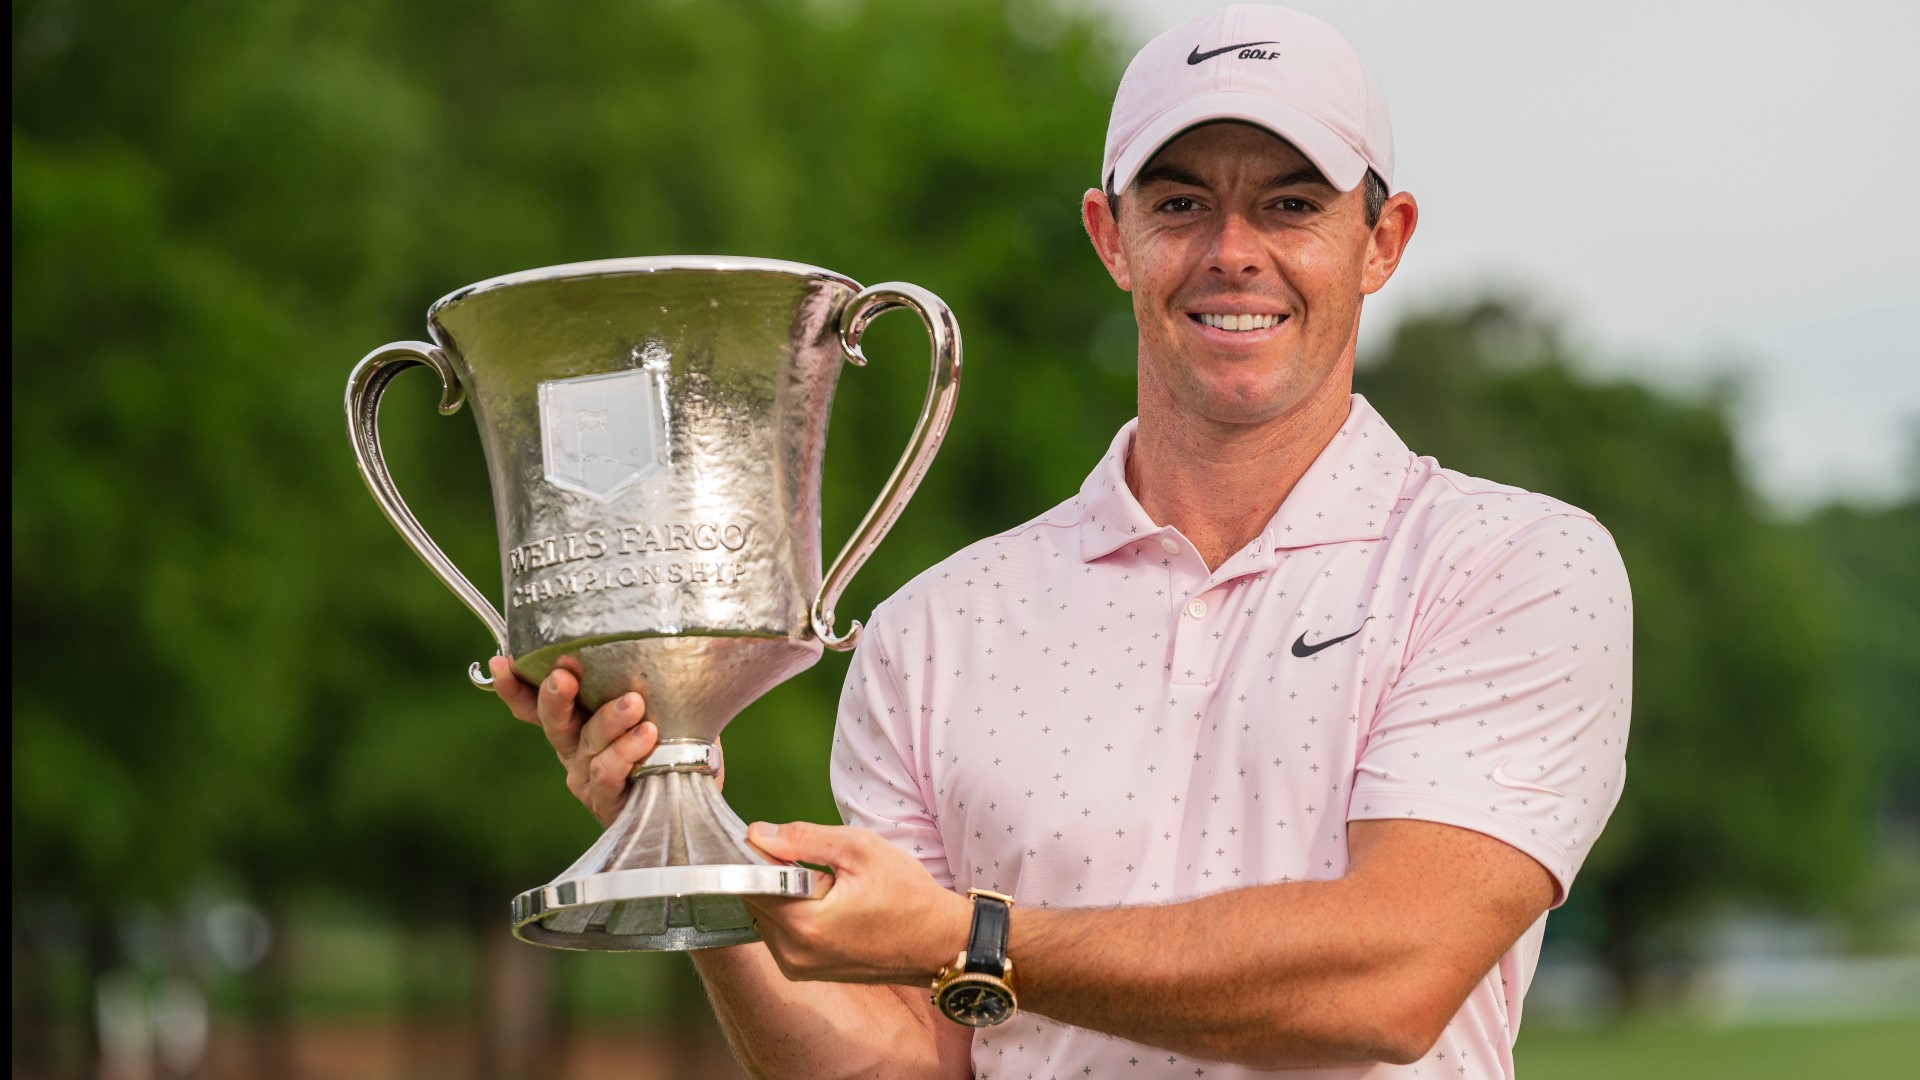 McIlroy is a winner again after 18 long months. And he picked the perfect place at Quail Hollow.